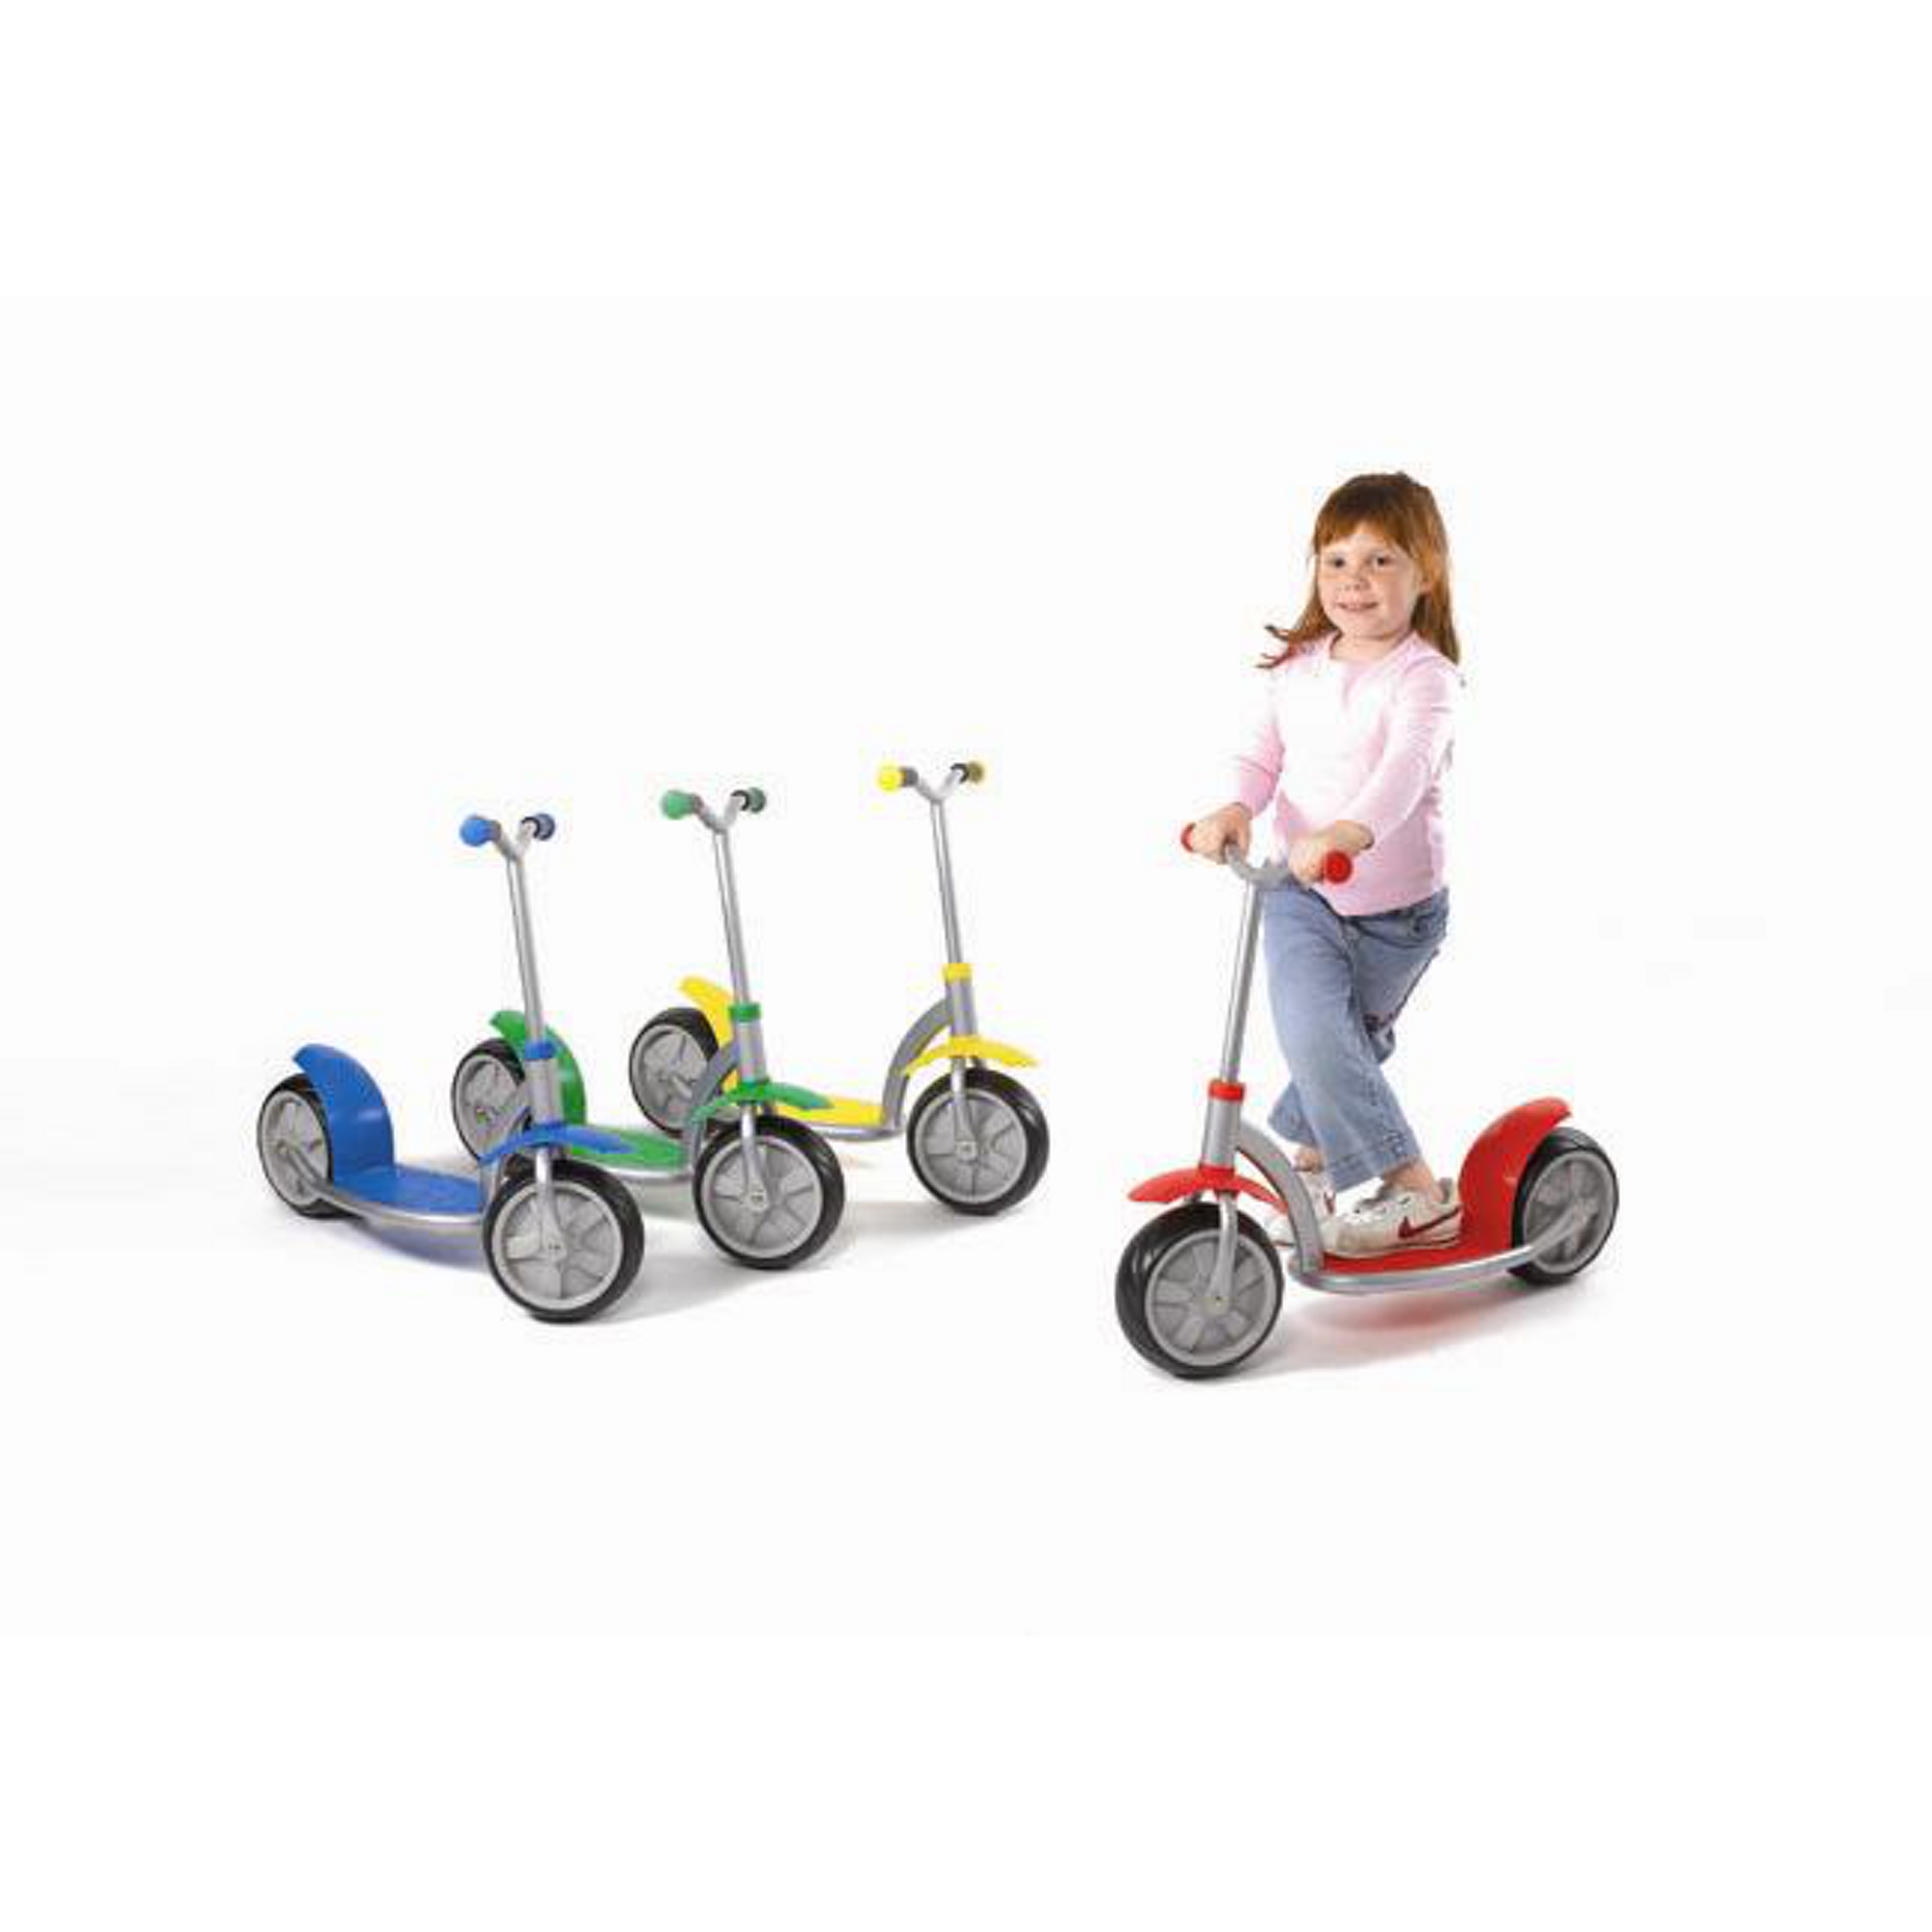 Scooter Offer - Buy 4